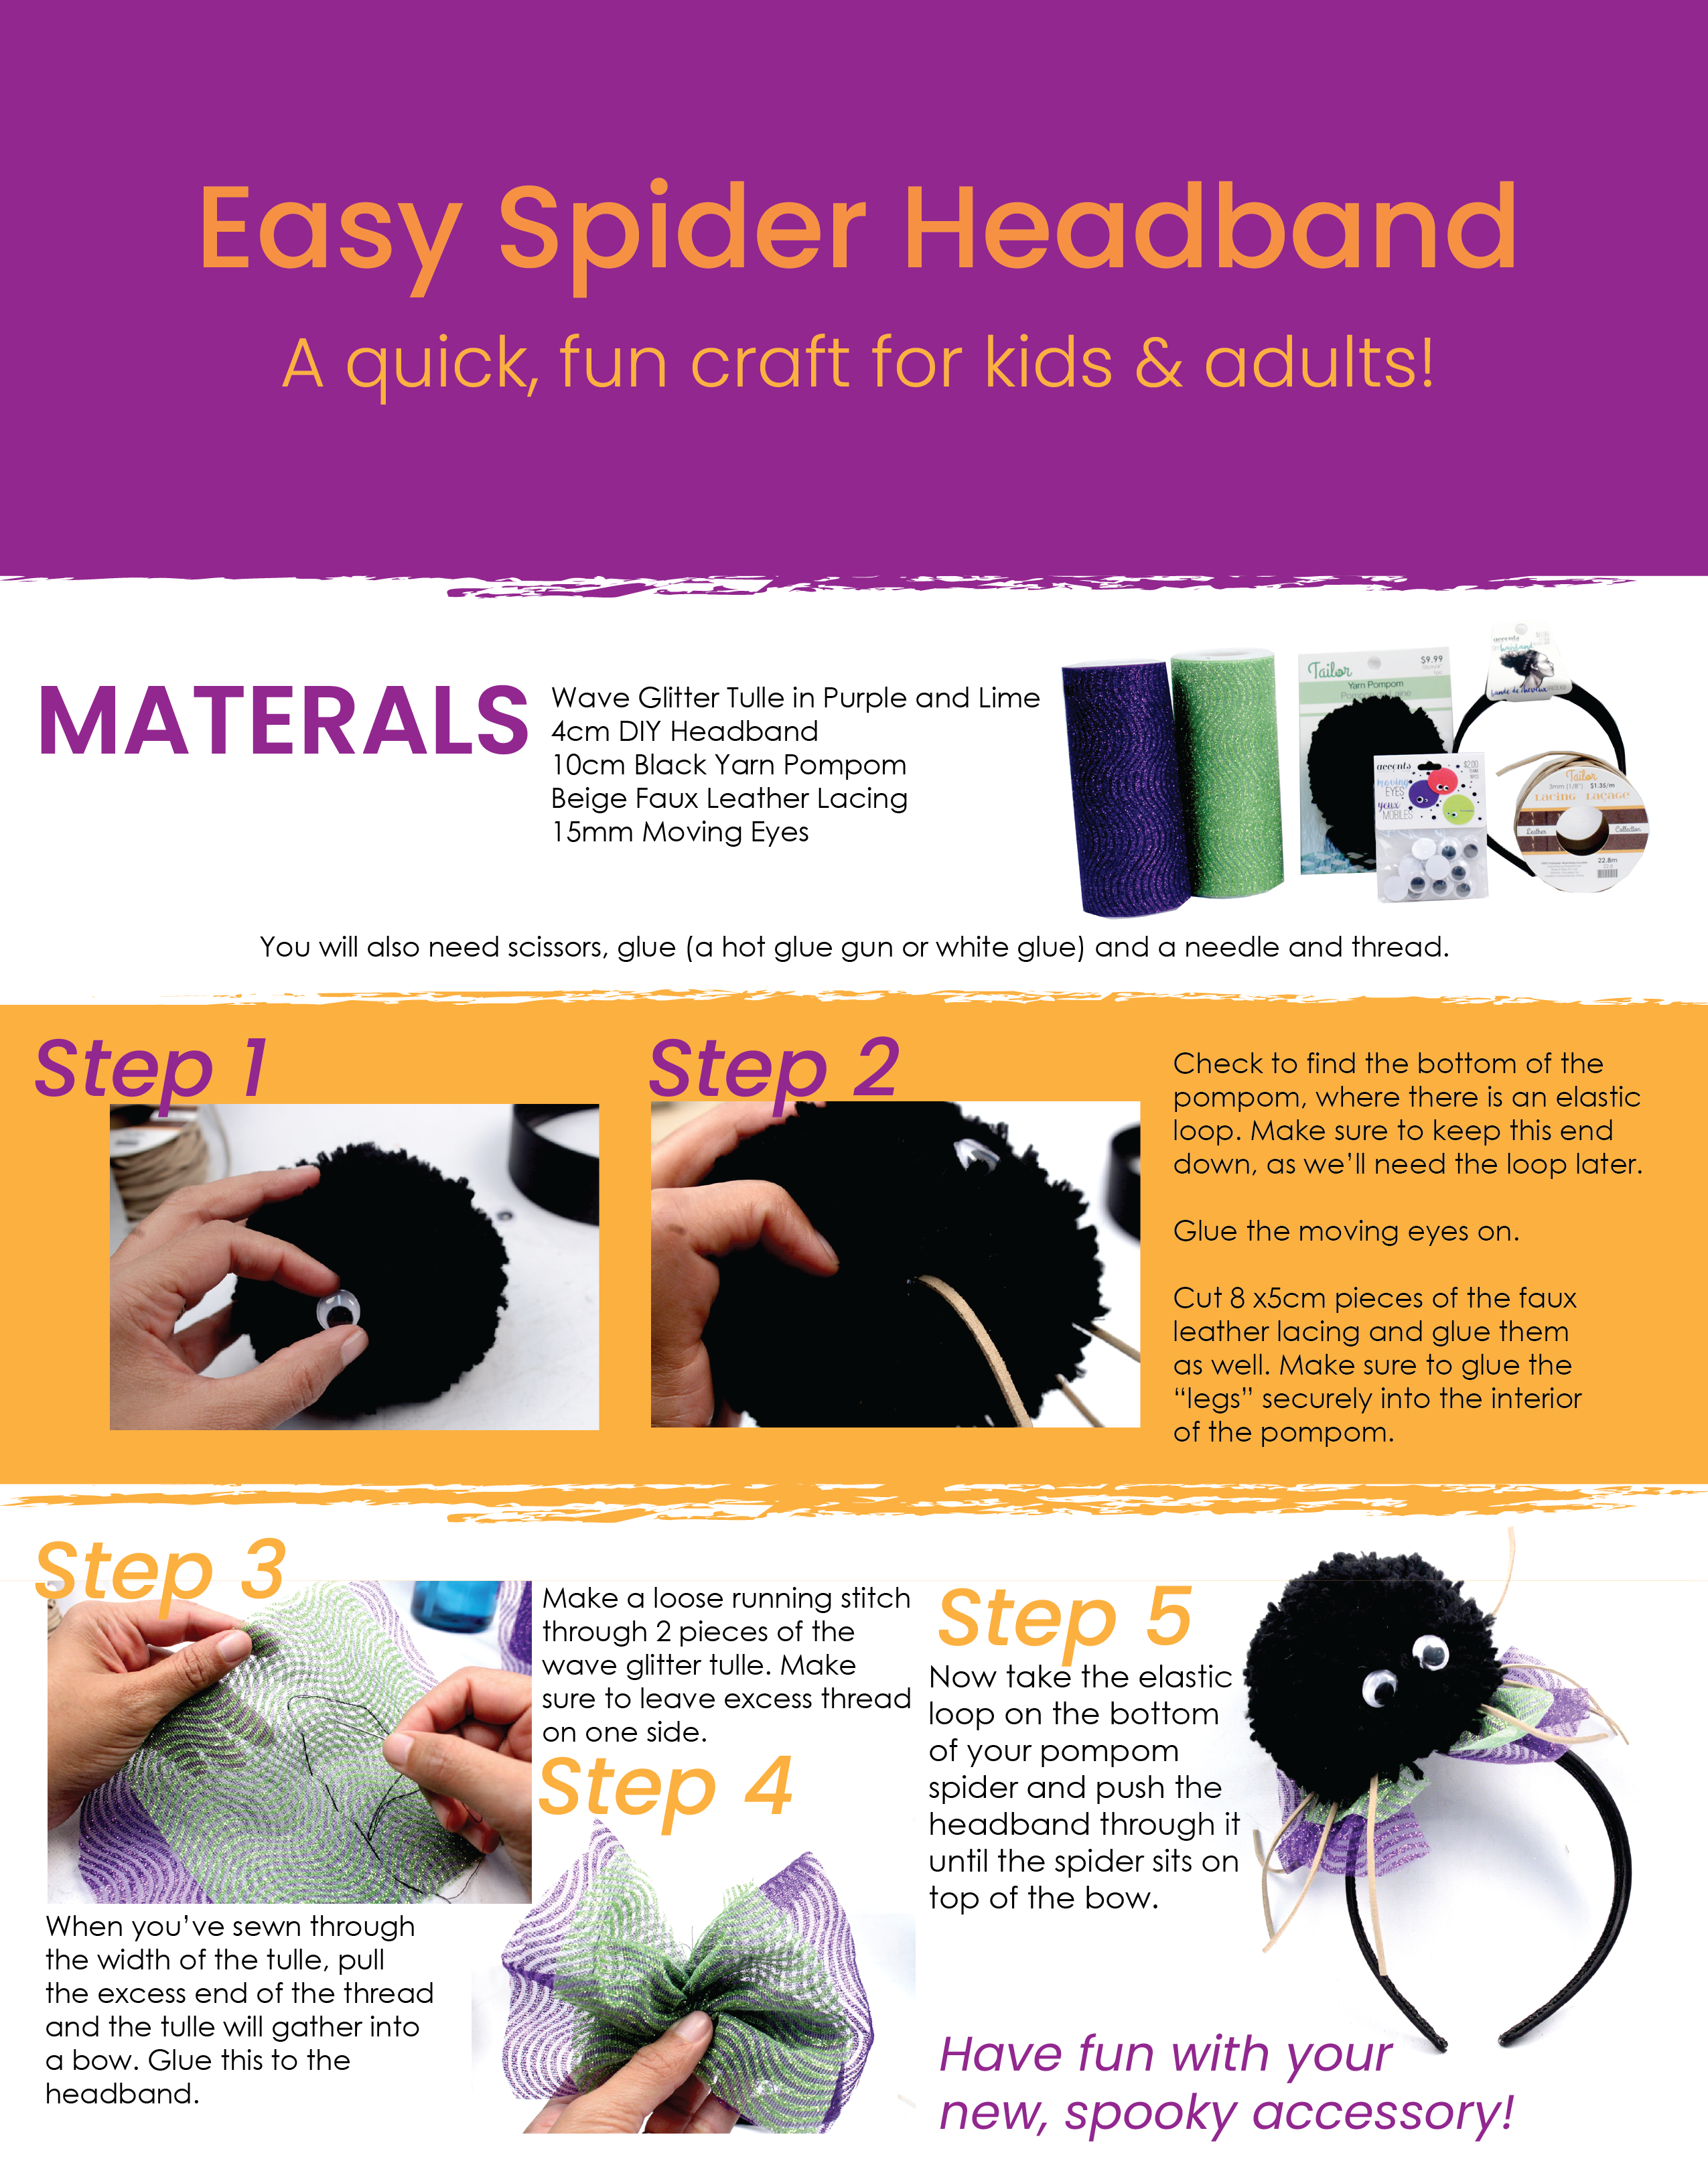 Materials & steps to create a spider headband